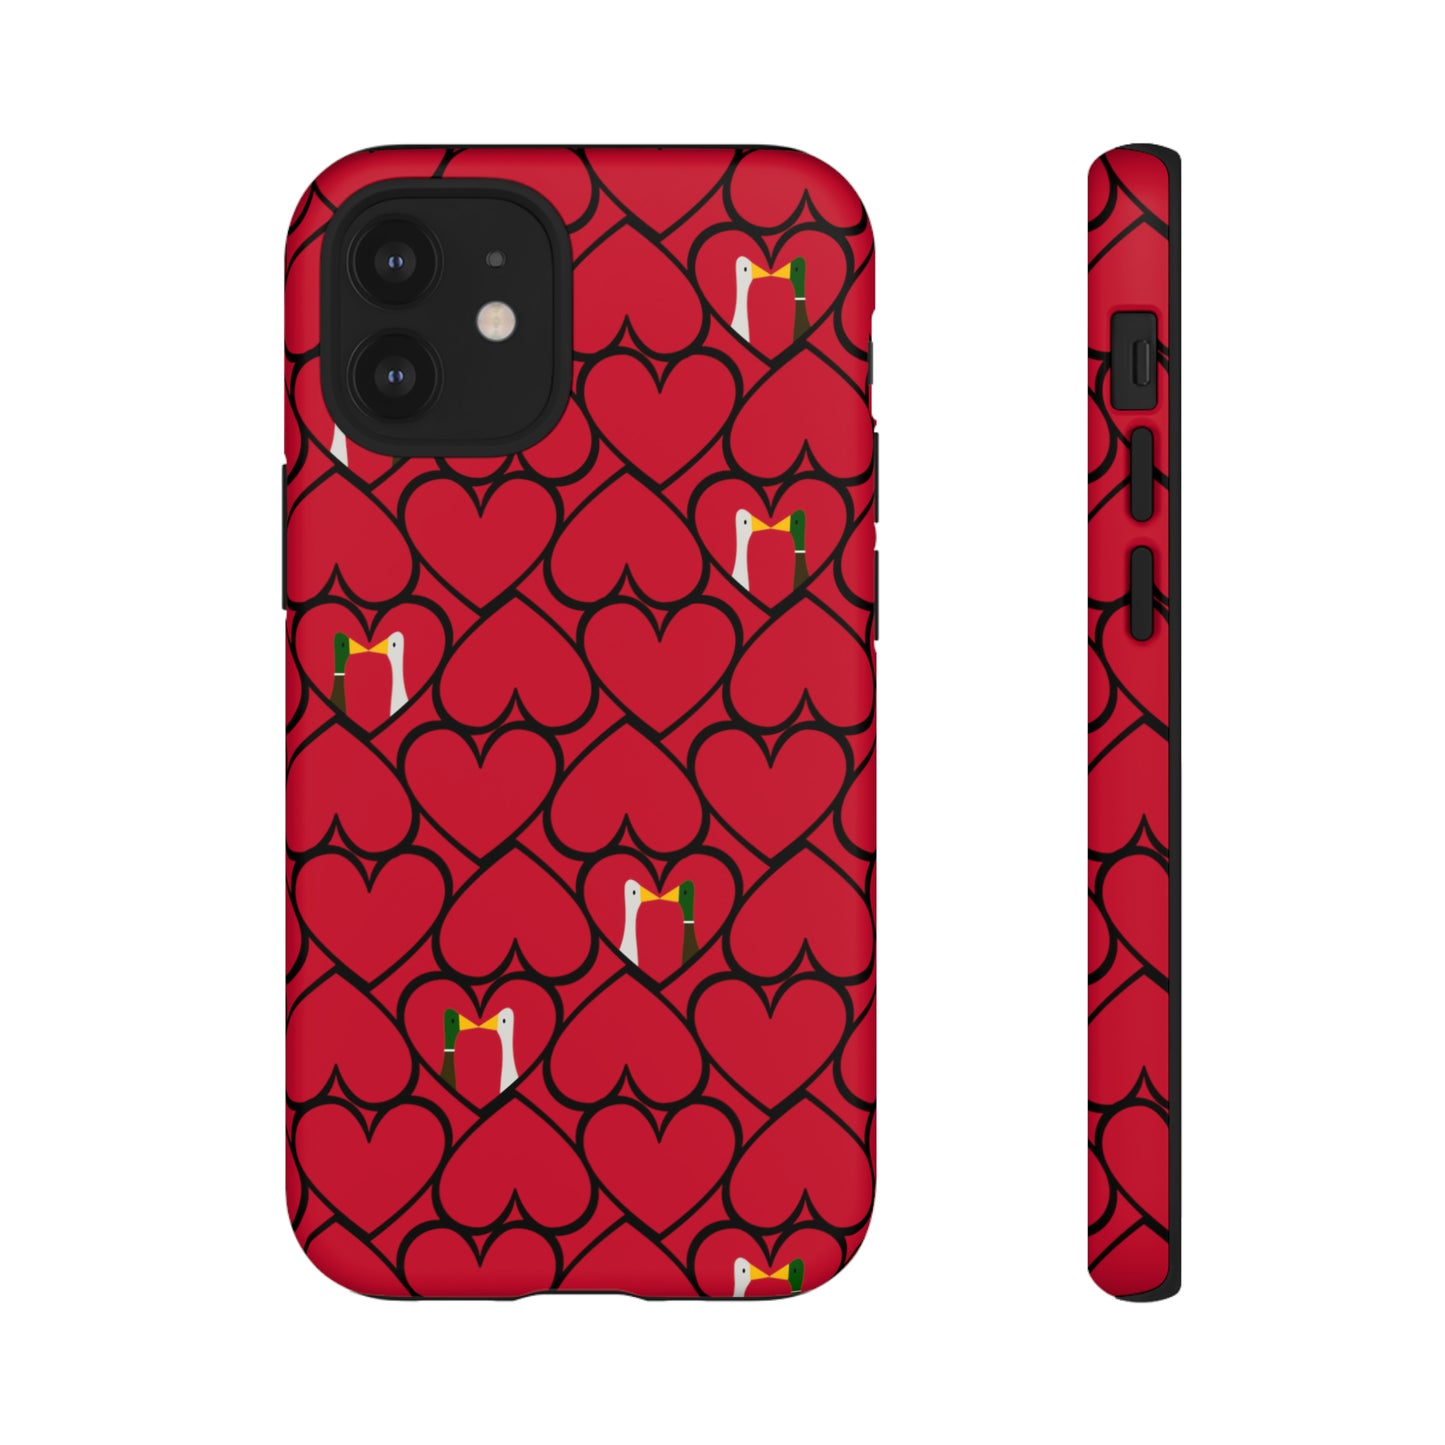 Ducks in hearts - Fire Engine Red c8092e - Tough Cases